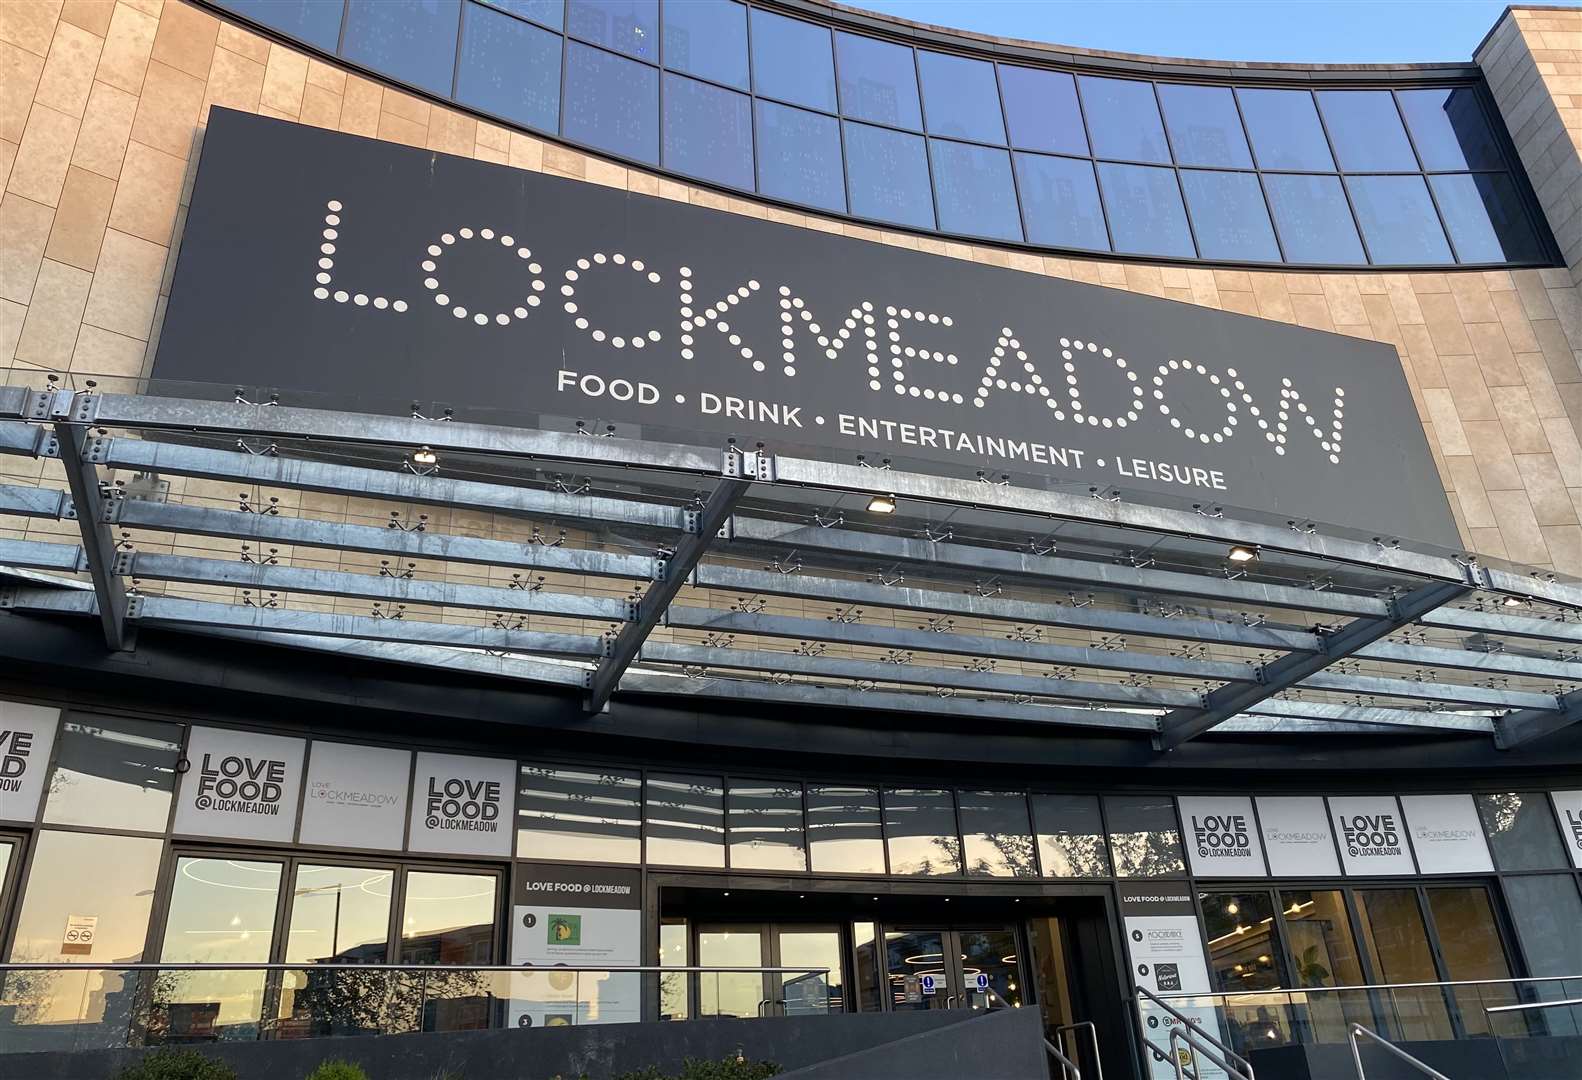 People regularly use the roads to access Lockmeadow Entertainment Centre